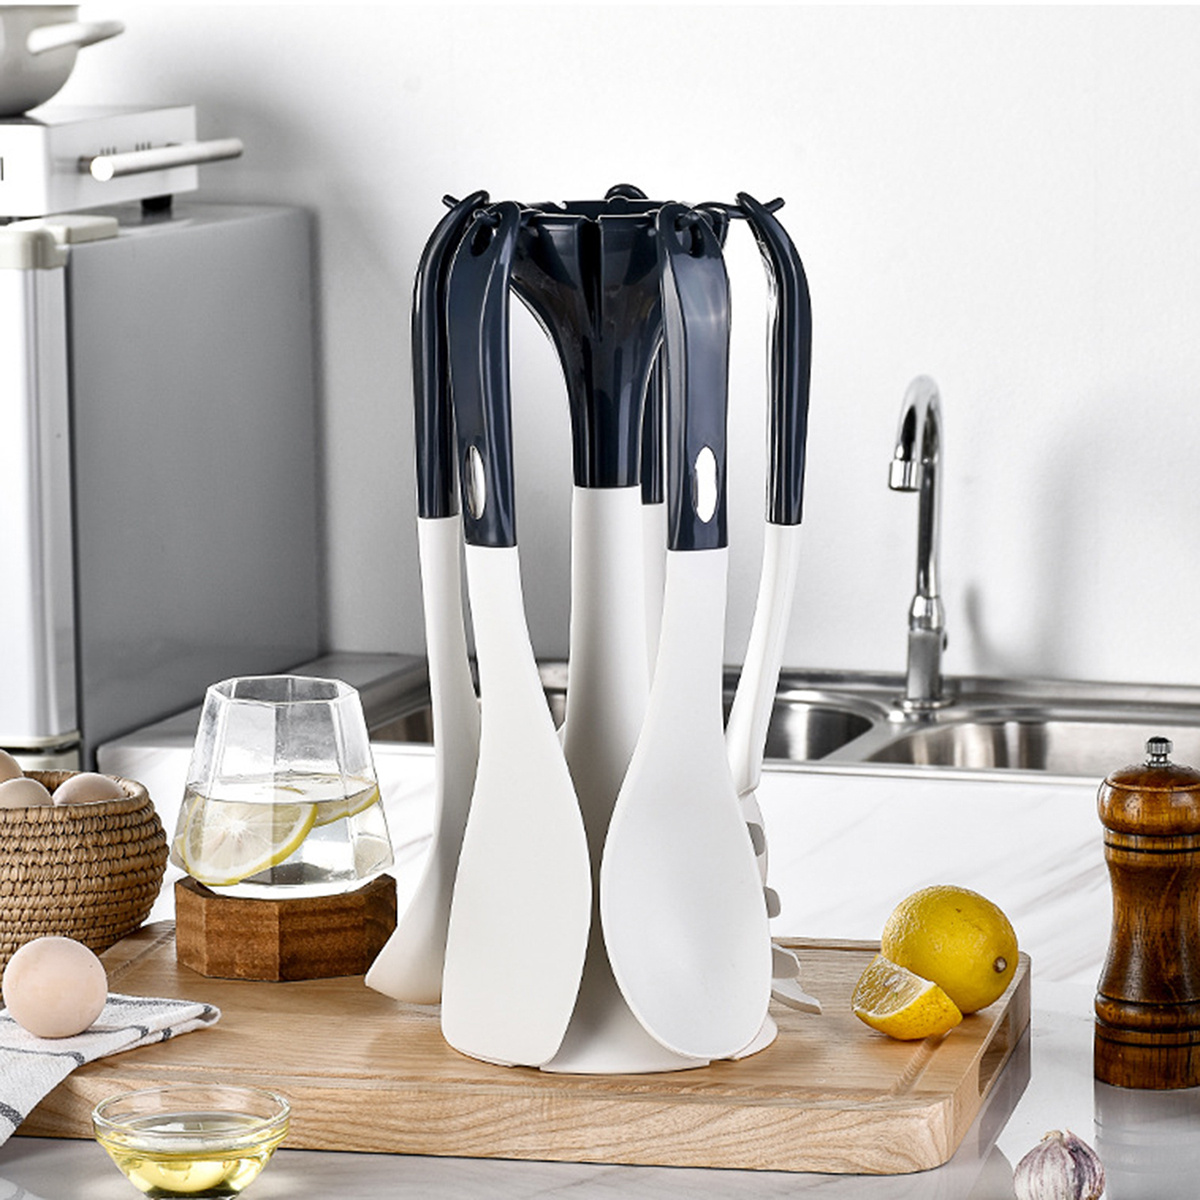 Sale & Clearance Kitchen Utensils, Gadgets & Tools